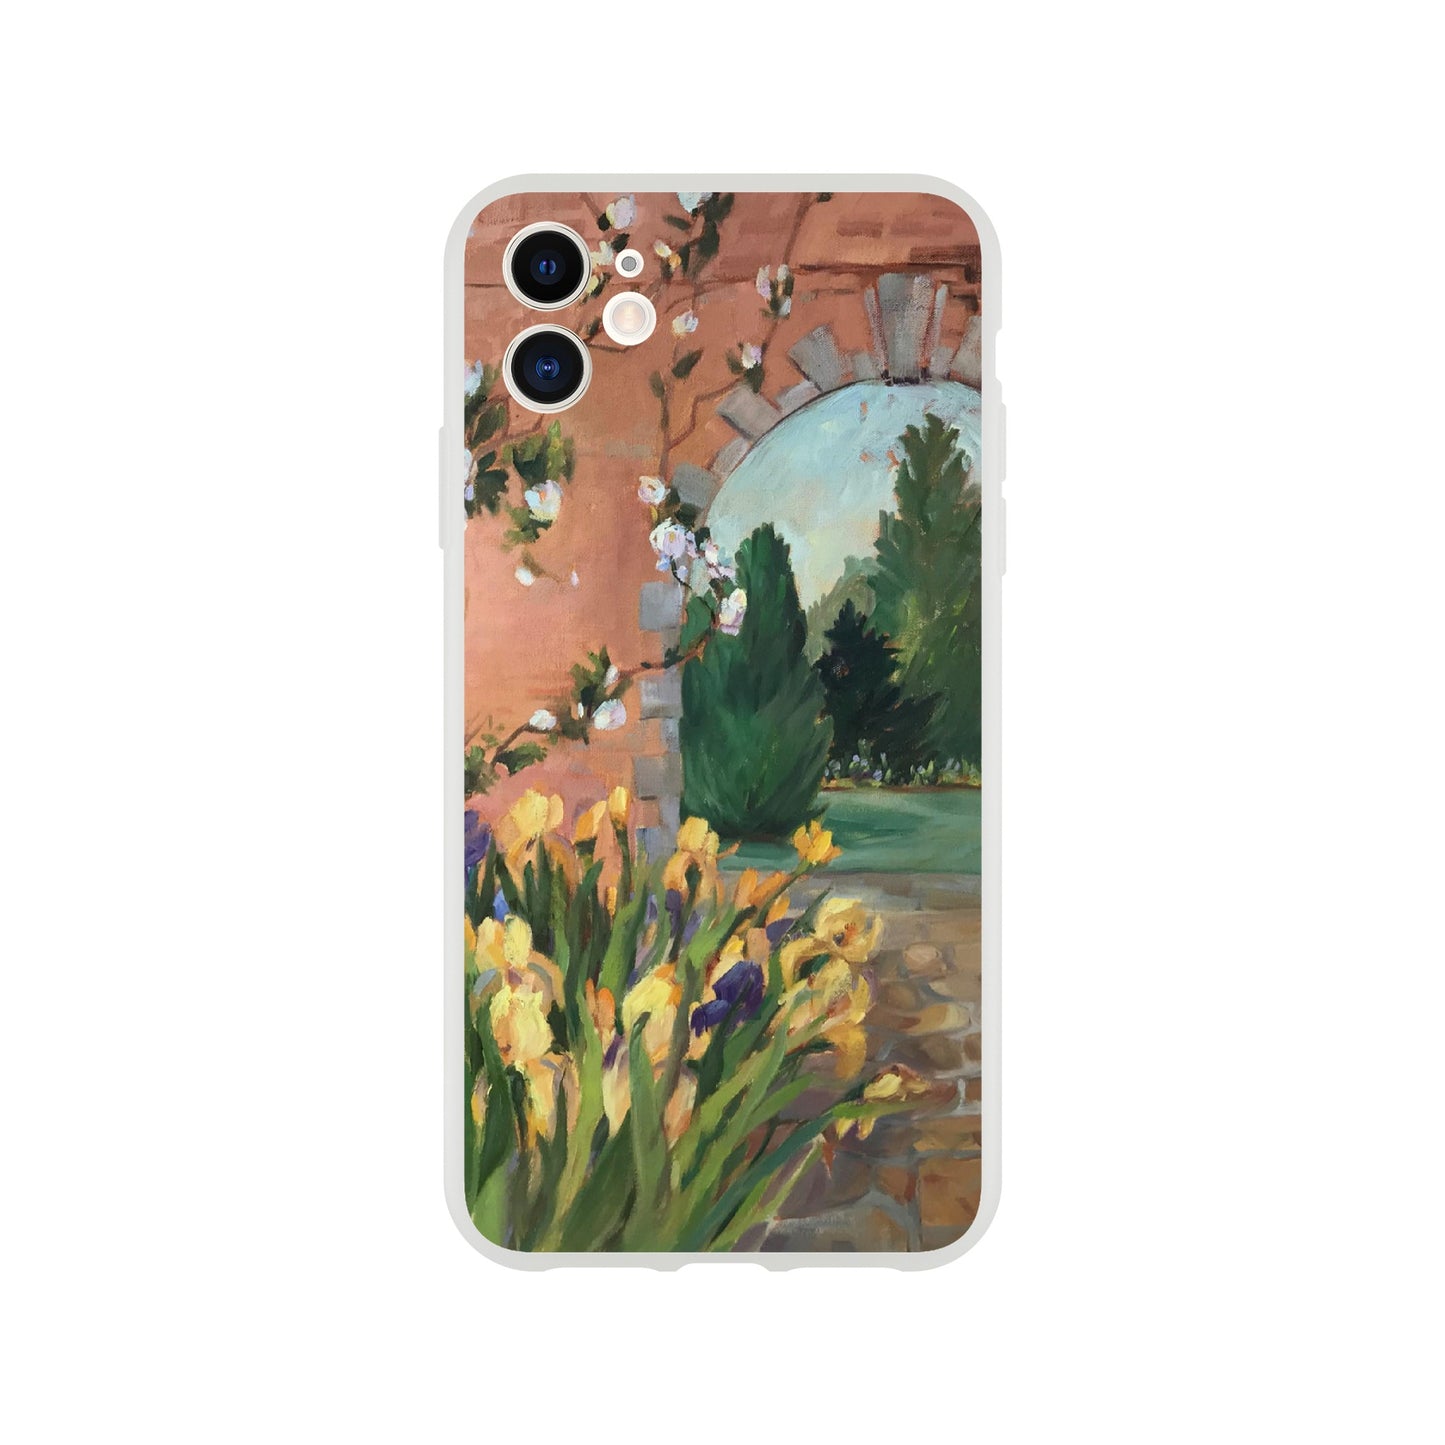 "Inner Garden" Flexi Phone Case for Iphone or Samsung by Barbara Cleary Designs